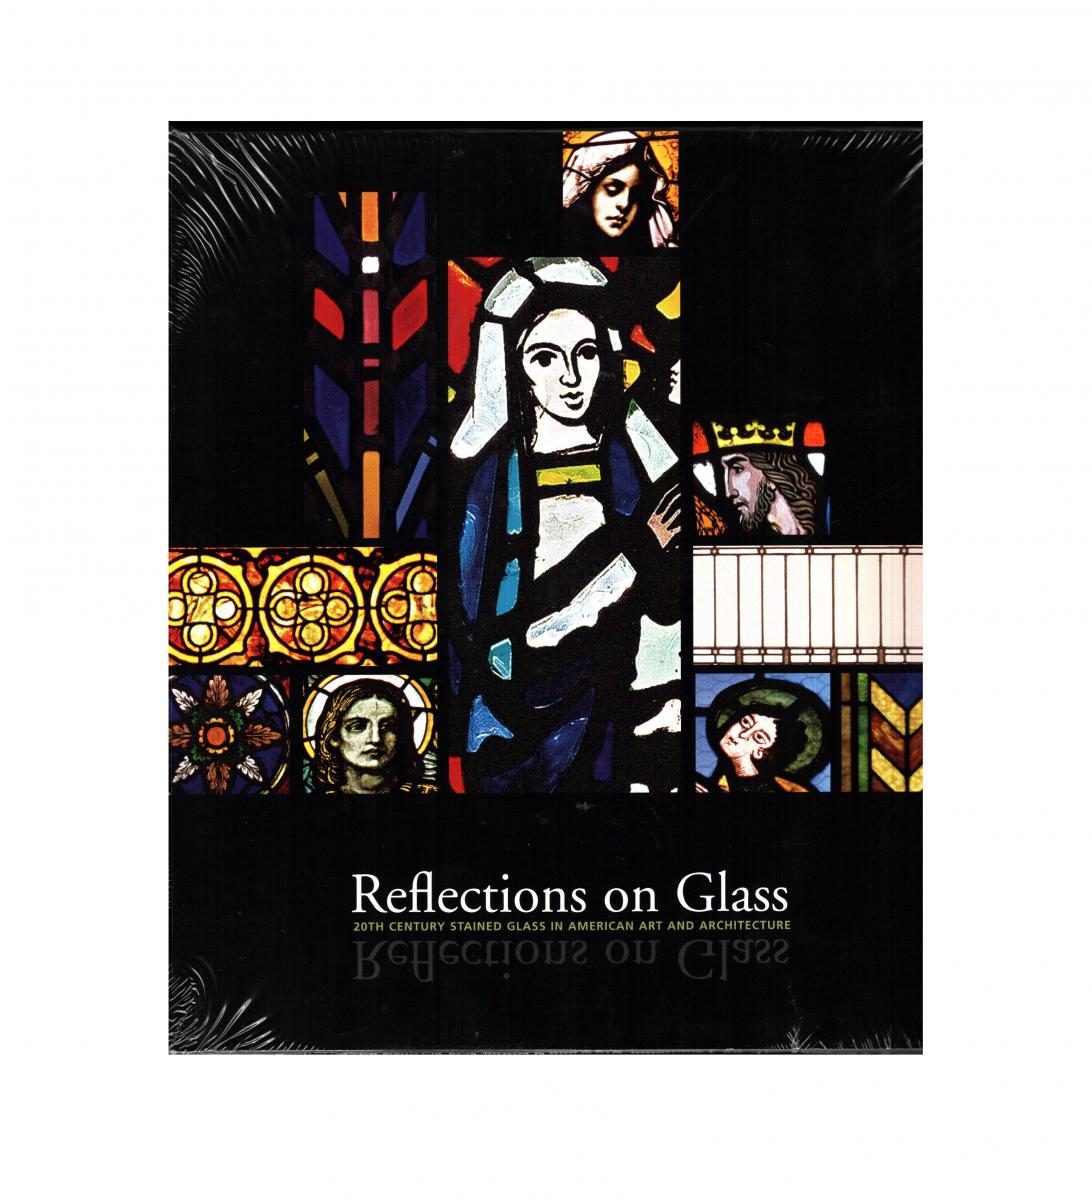 Reflections on Glass: 20th Century Stained Glass in American Art and Architecture